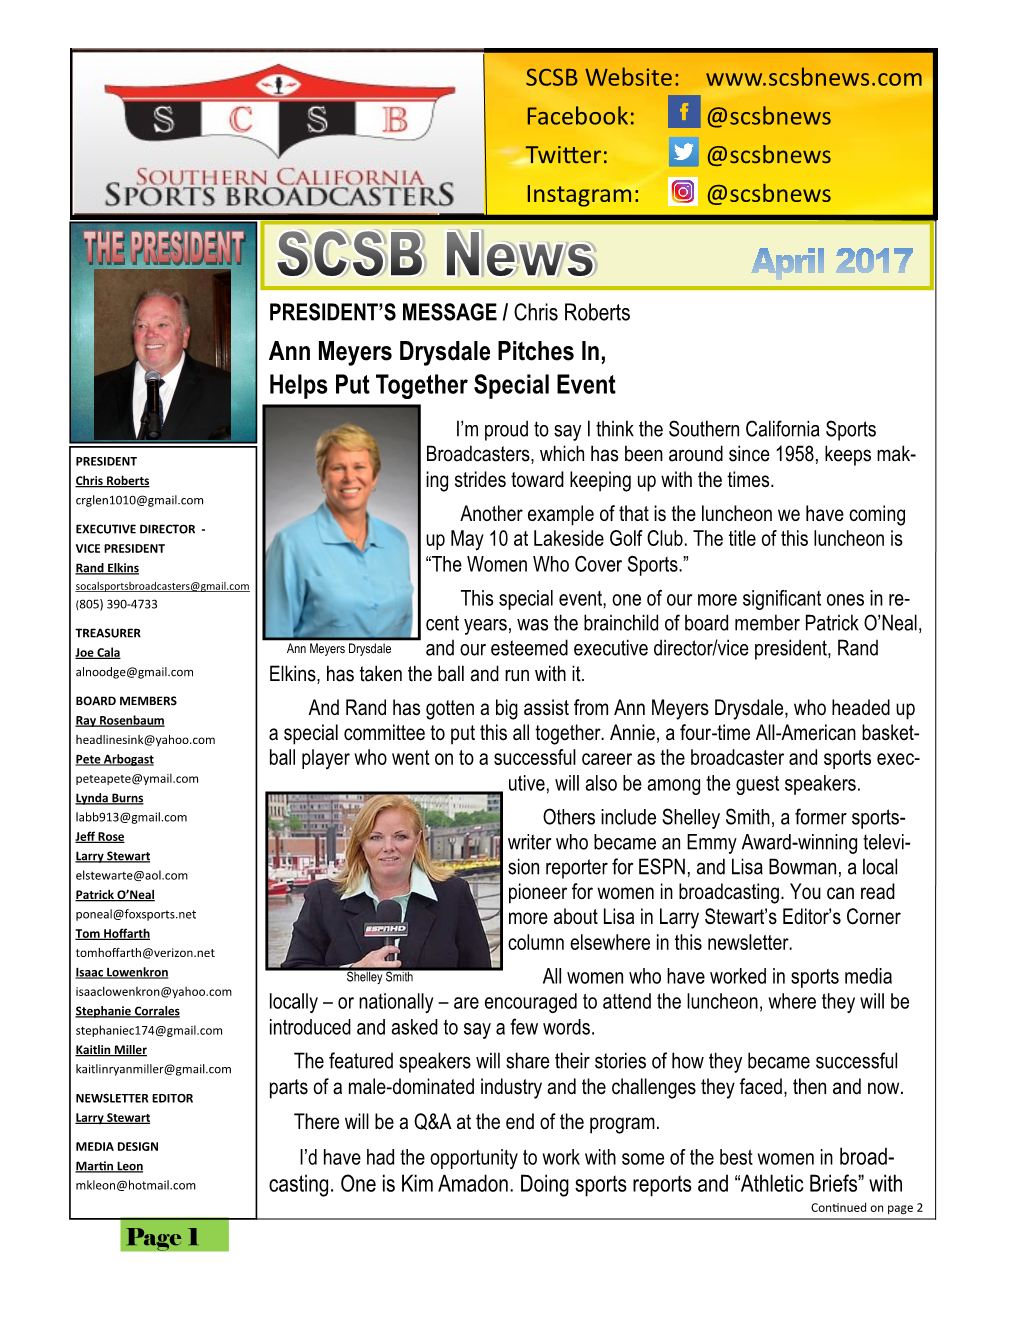 Ann Meyers Drysdale Pitches In, SCSB Website